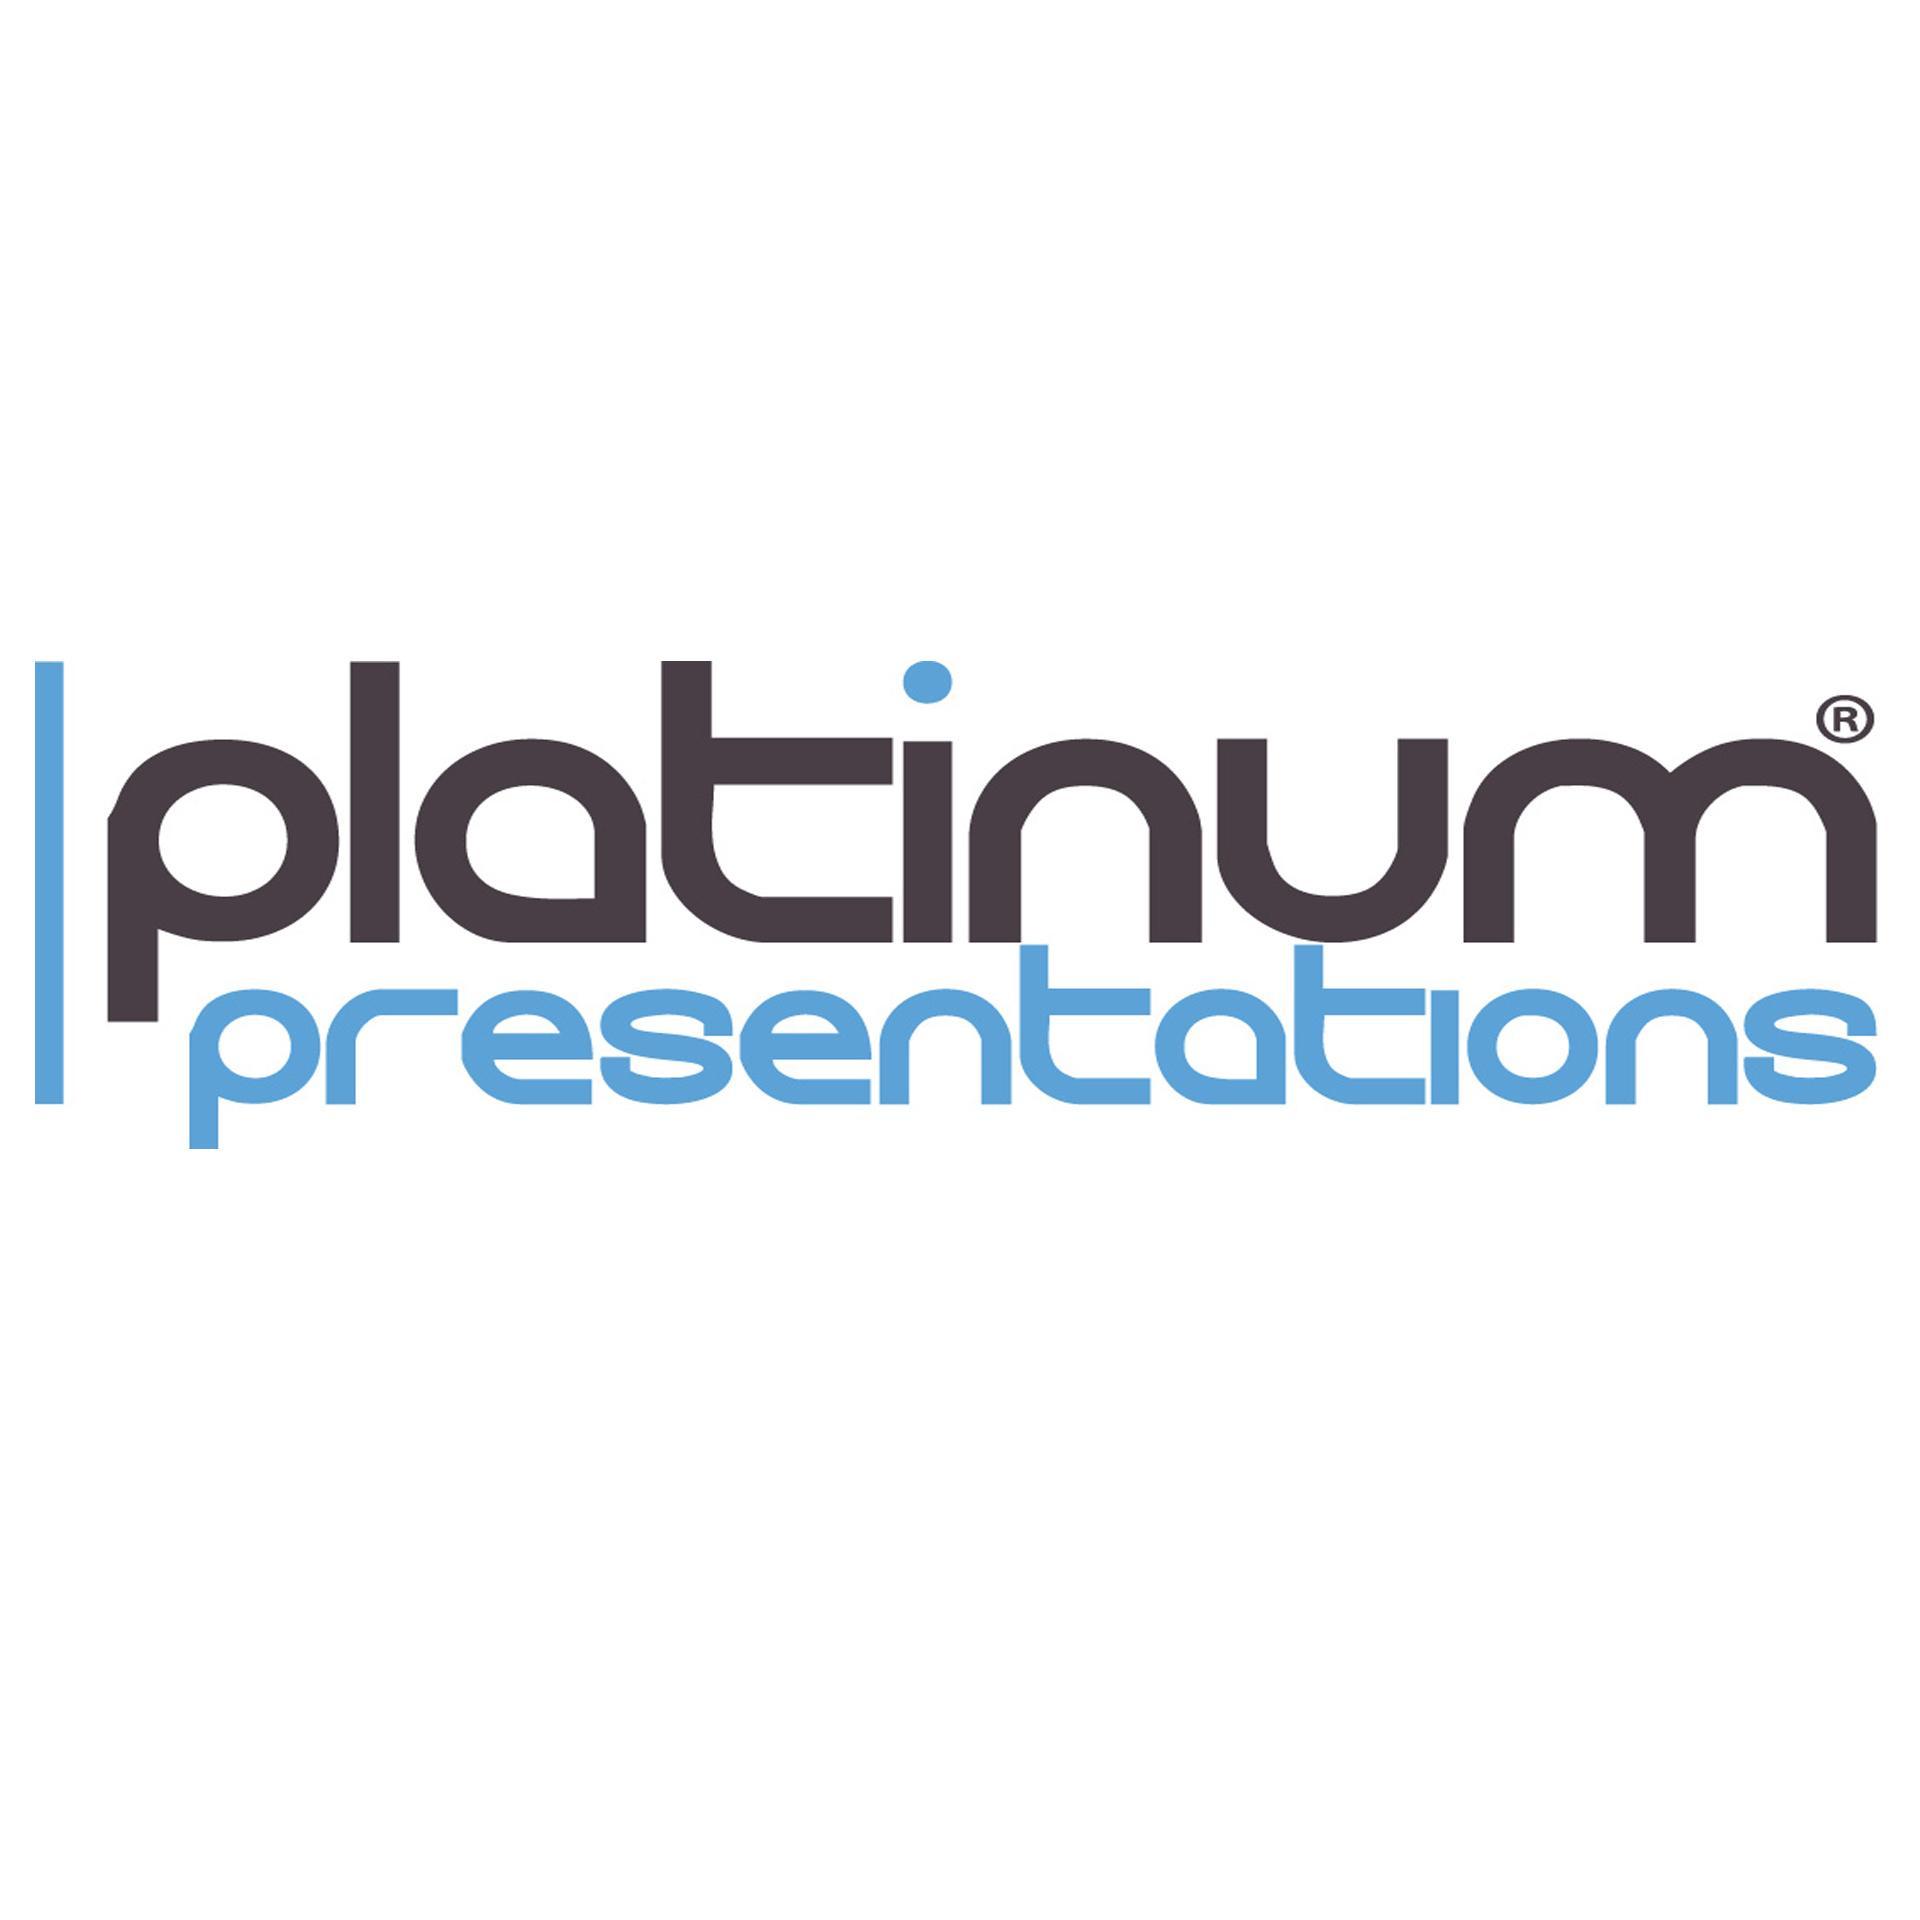 Platinum Presentations suppliers of Audio Visual Equipment to the events Industry and private clients